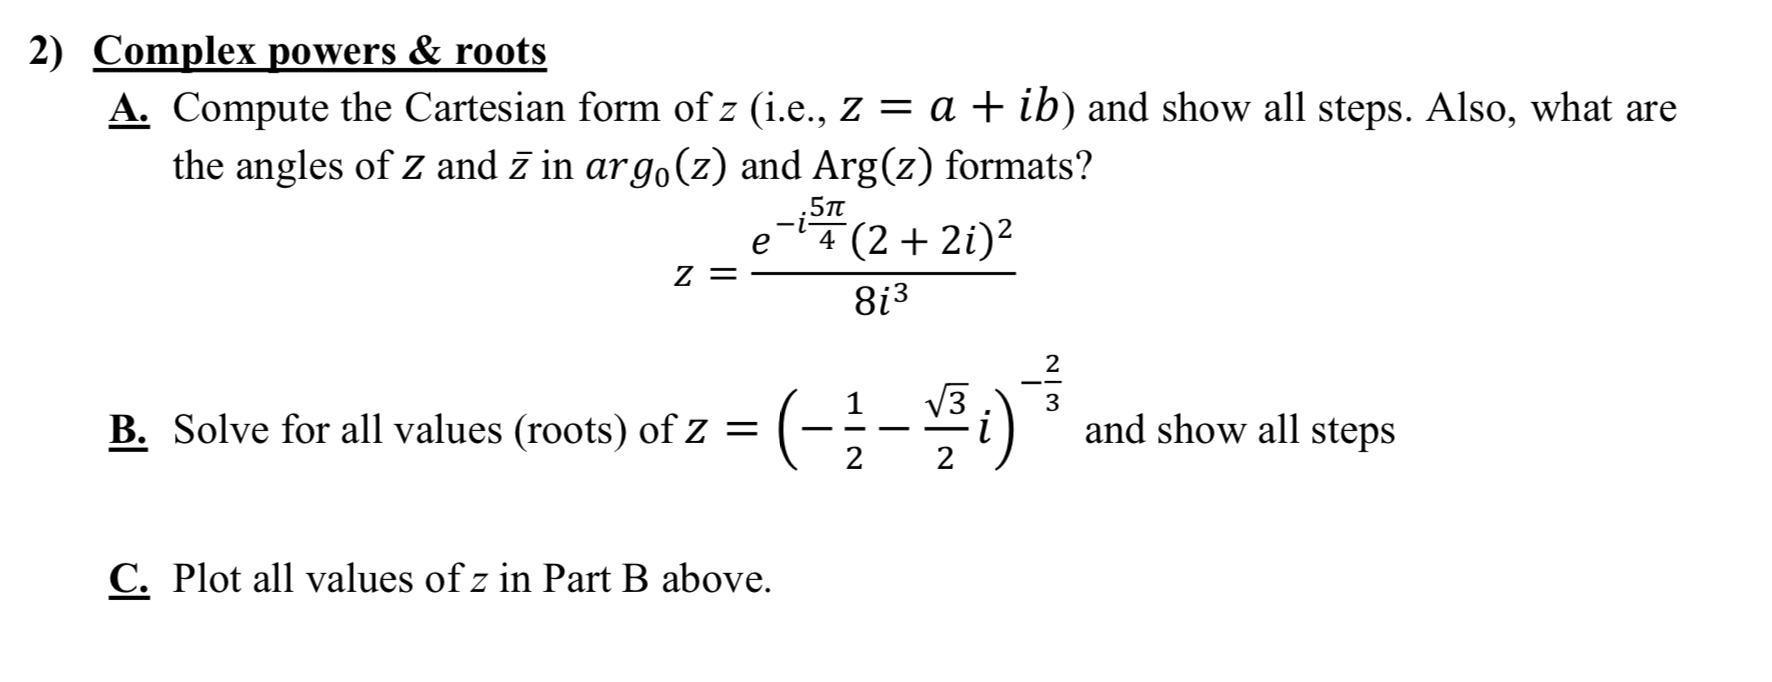 Compute the Cartesian form of z (i.e., z = a + ib) and show all steps. Also, what are
the angles of z and z in argo(z) and Arg(z) formats?
